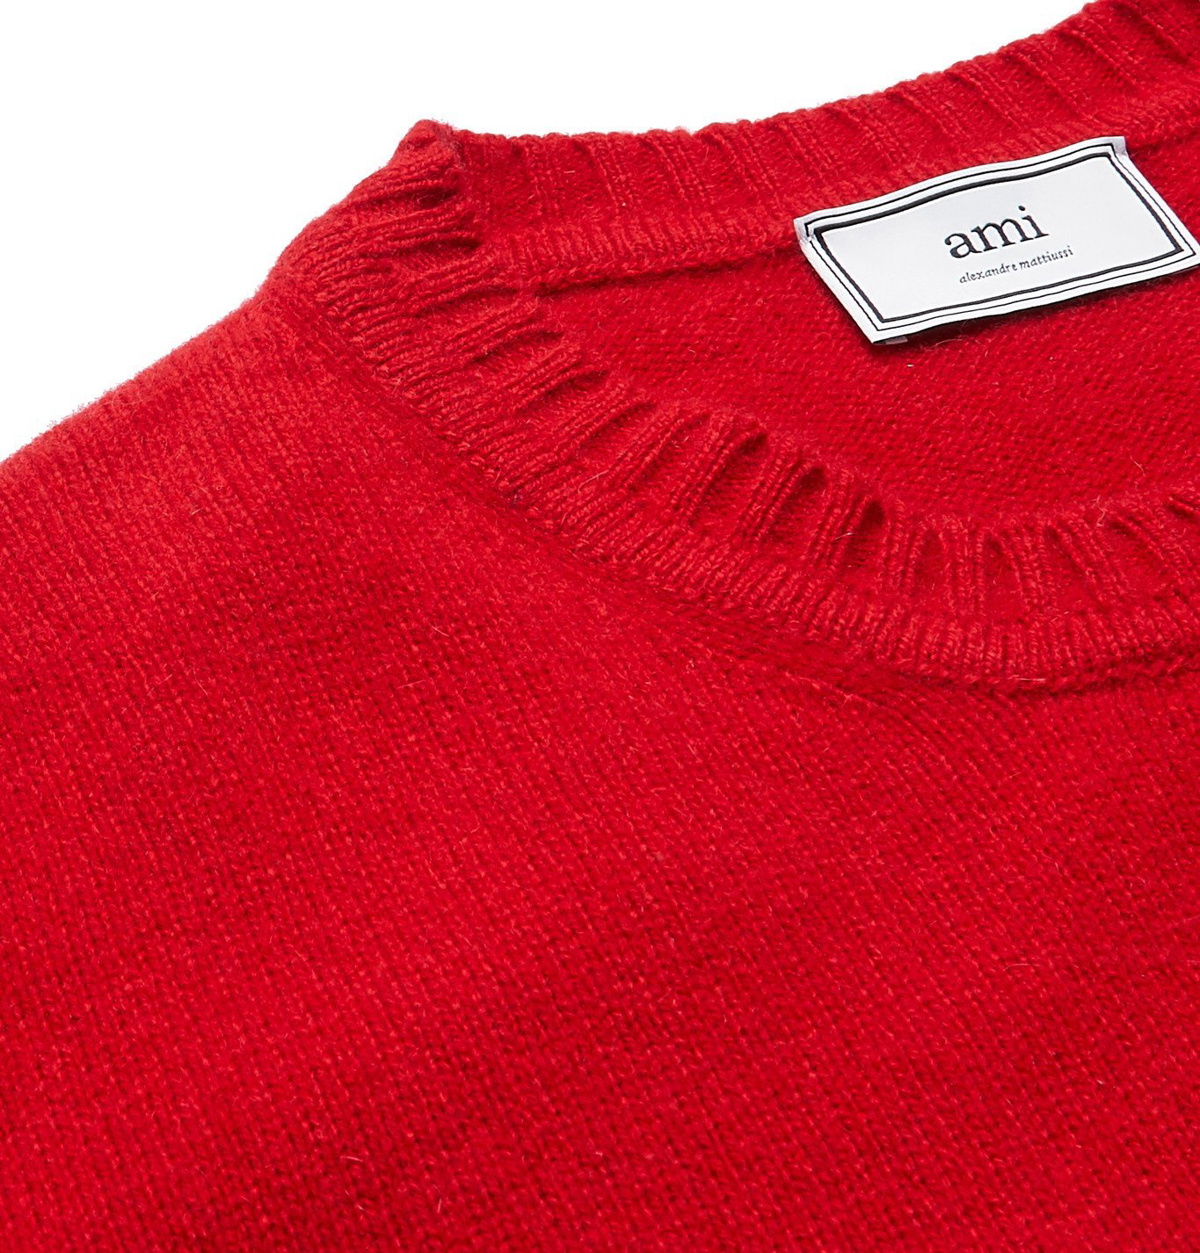 AMI PARIS - Logo-Embroidered Cashmere Sweater - Red AMI